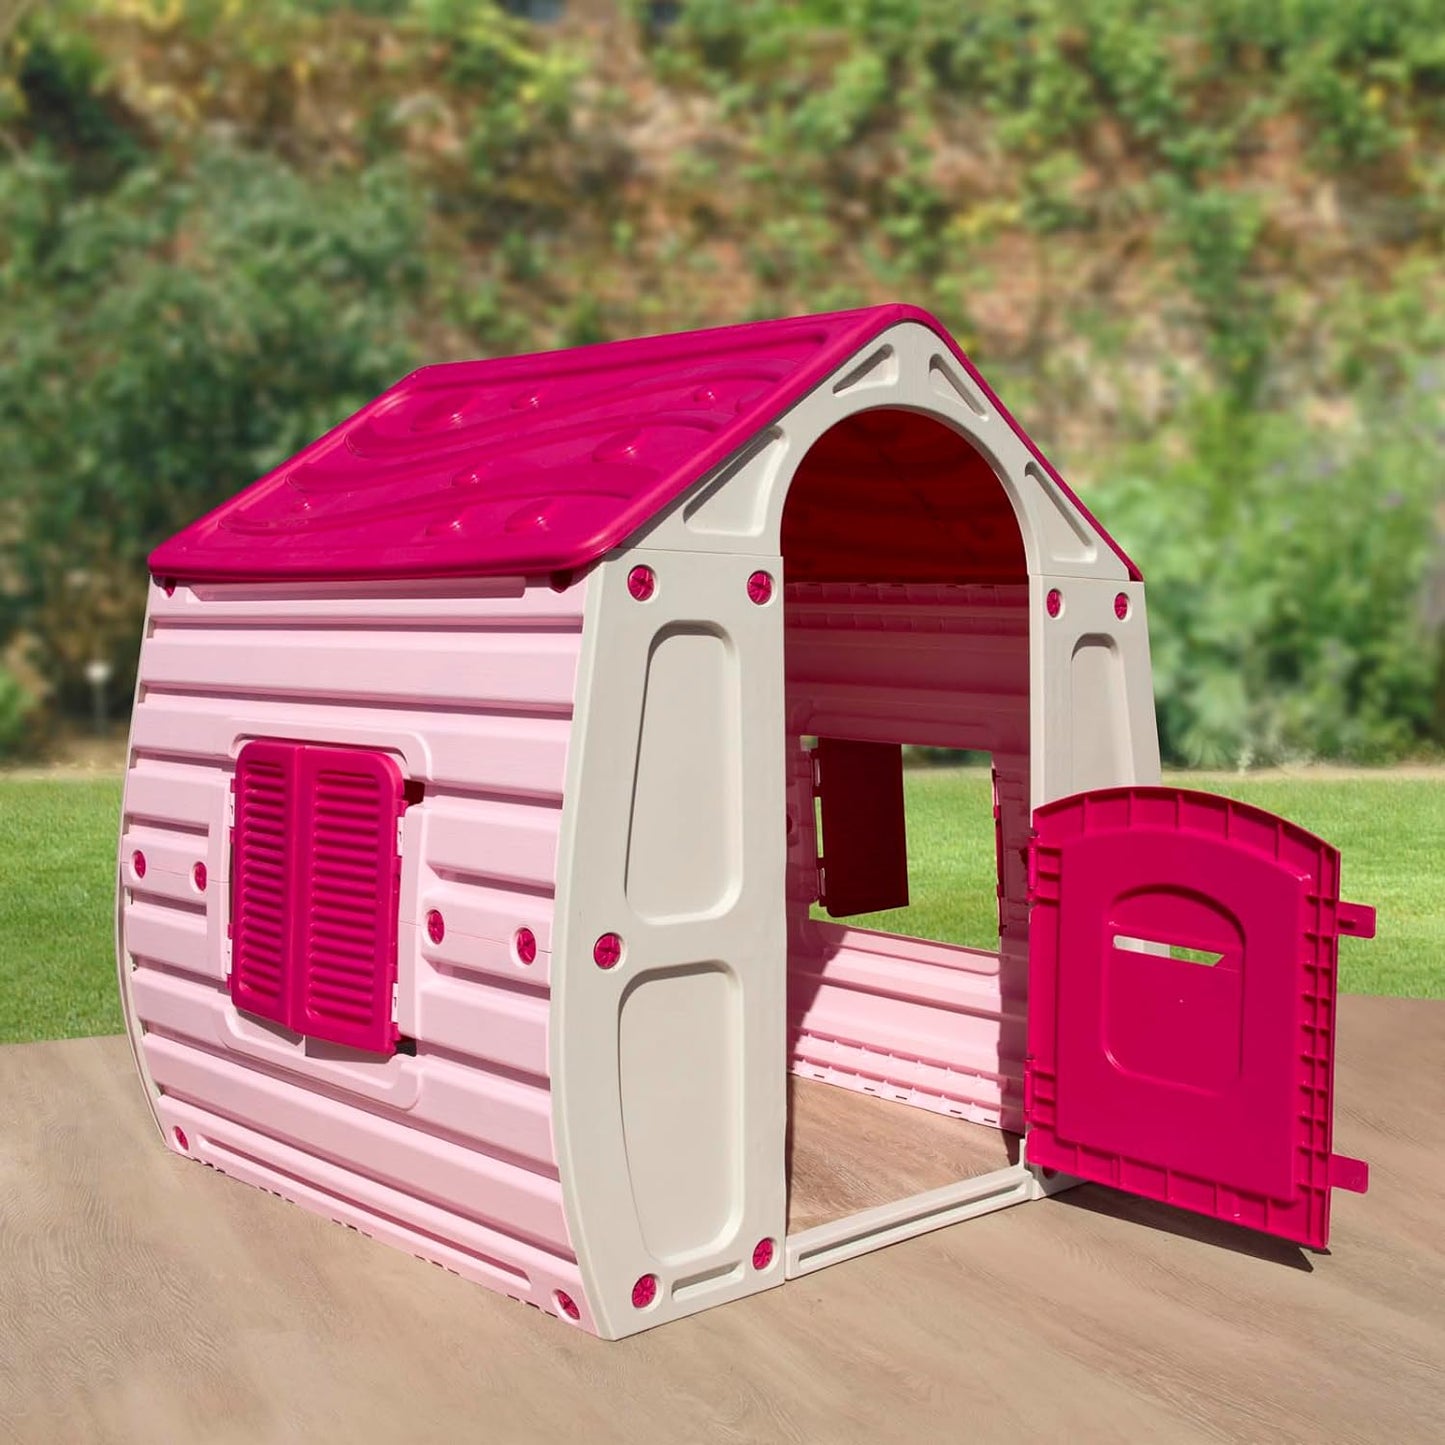 Pink Children's Playhouse / Wendy House - Suitable For In Or Outdoors